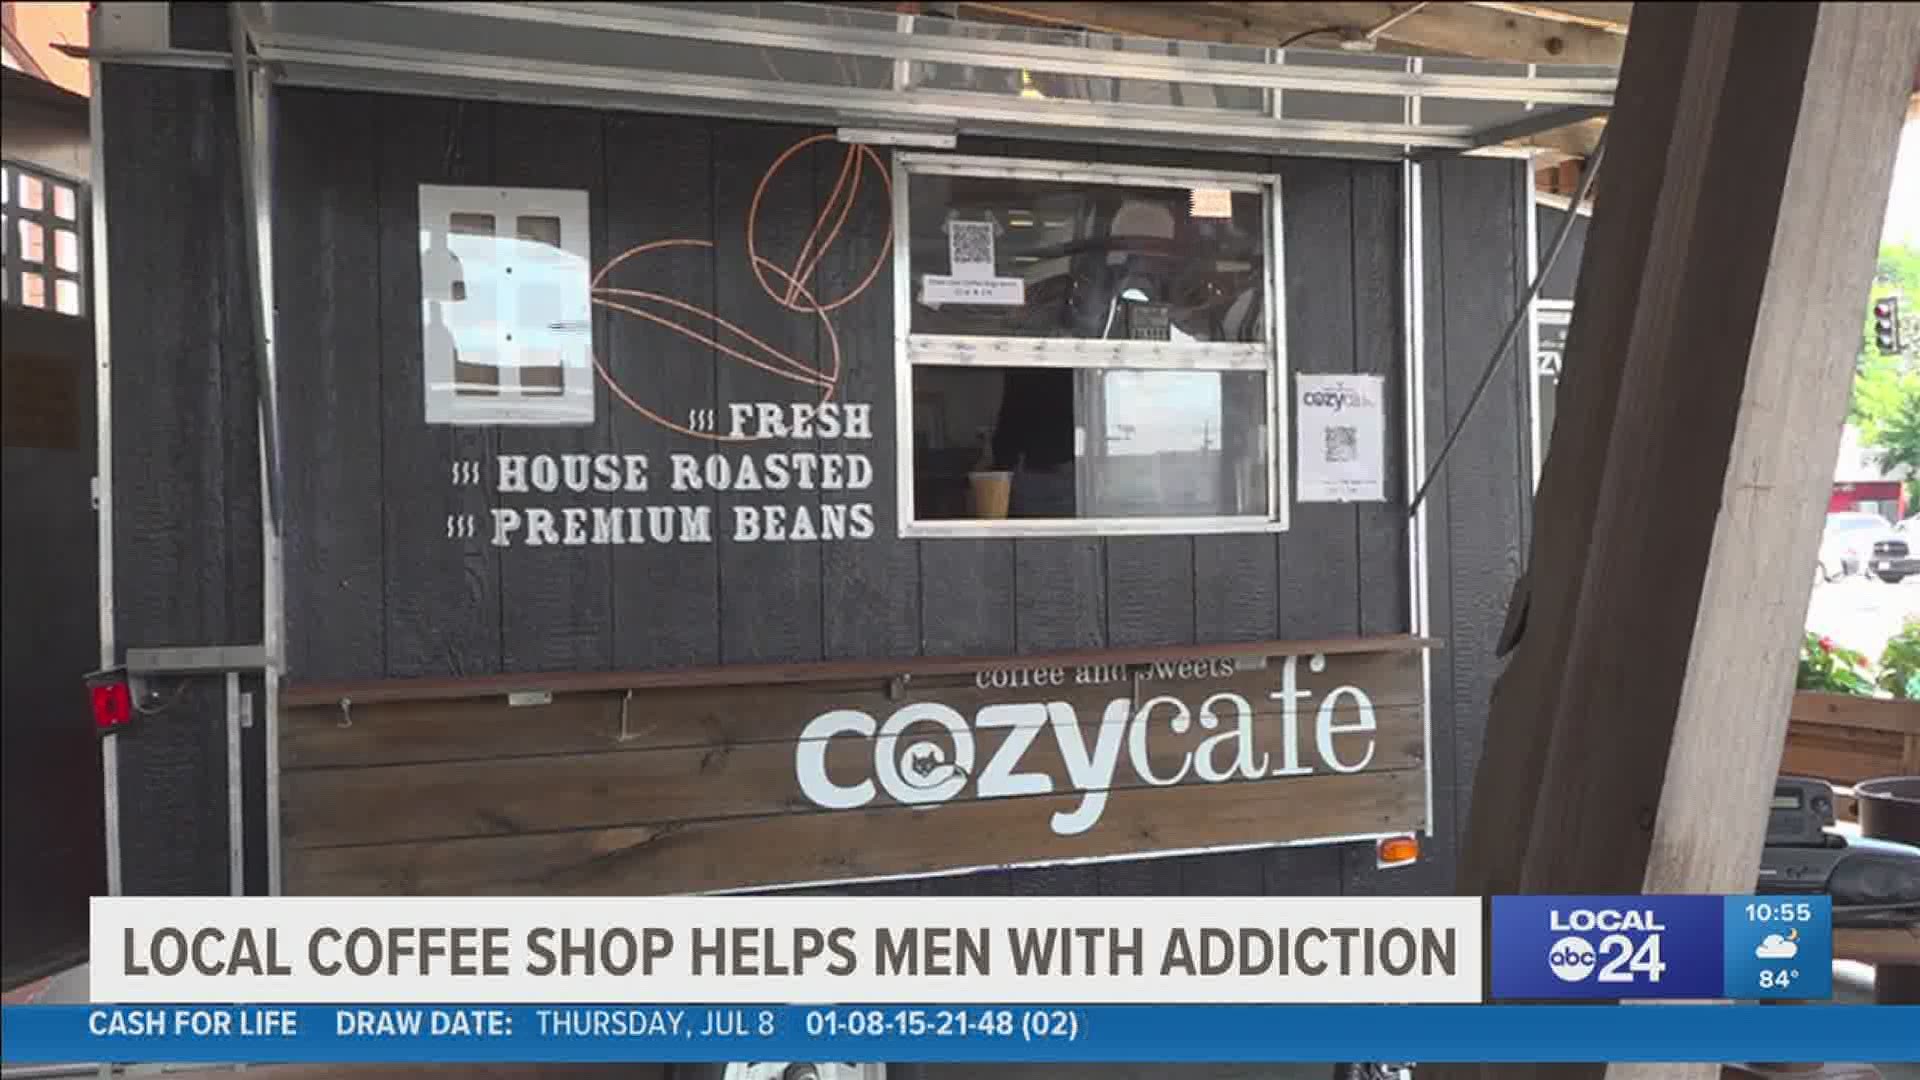 “Every cup of coffee you buy here, hot or cold, helps someone in recovery.”